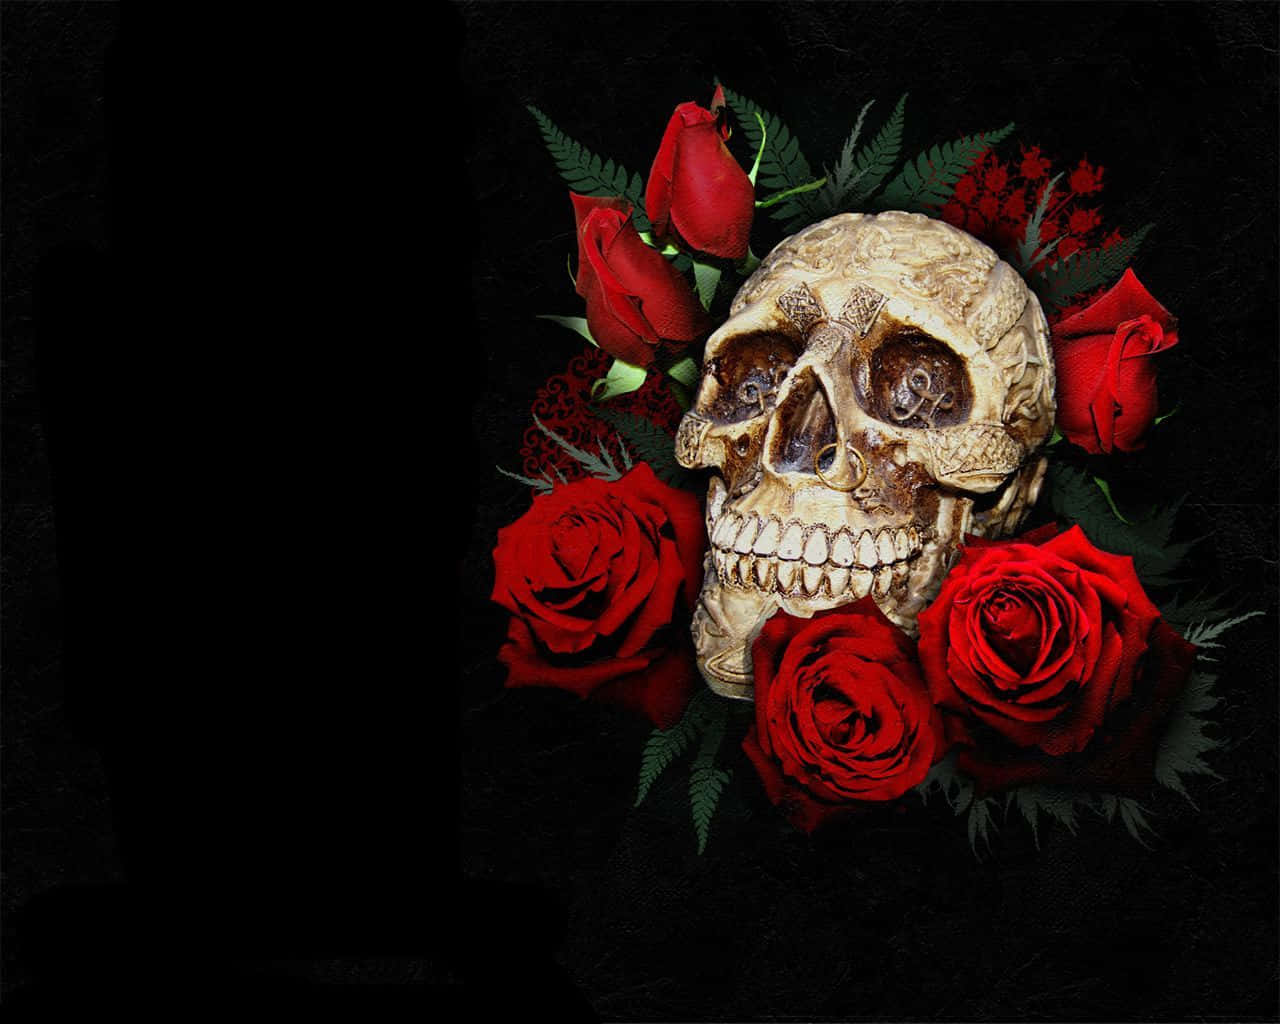 Love Reigns with this Unique Combination of Skulls and Roses Wallpaper